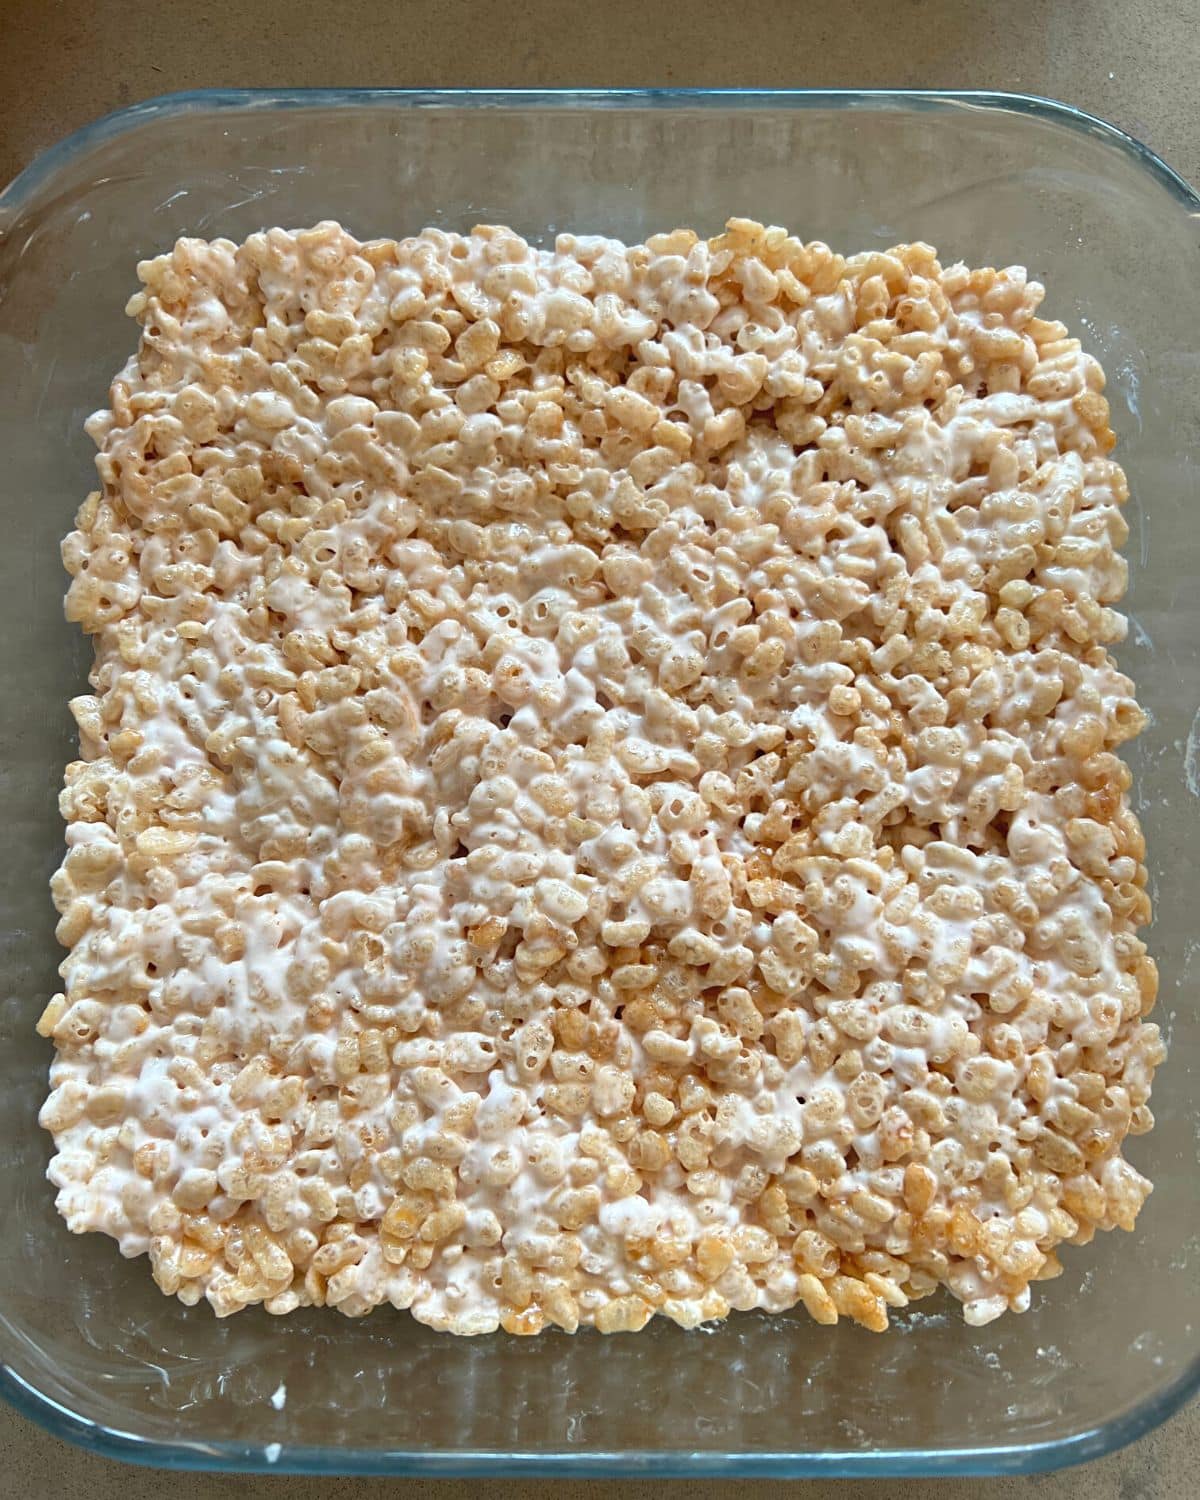 Rice krispies and marshmallows in a glass dish.